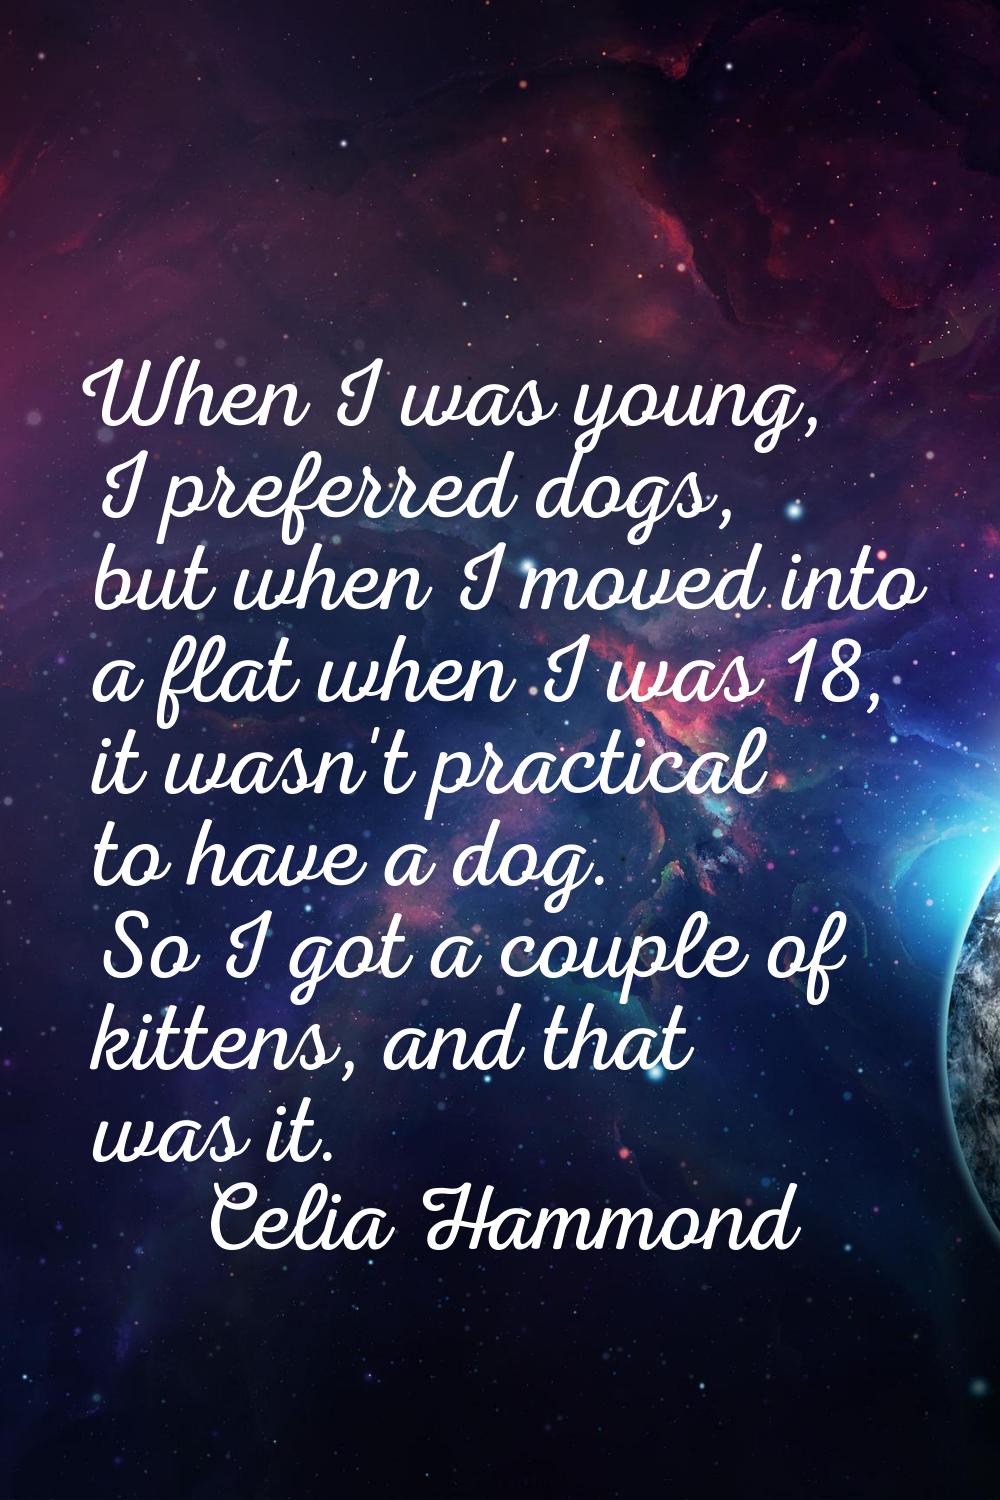 When I was young, I preferred dogs, but when I moved into a flat when I was 18, it wasn't practical